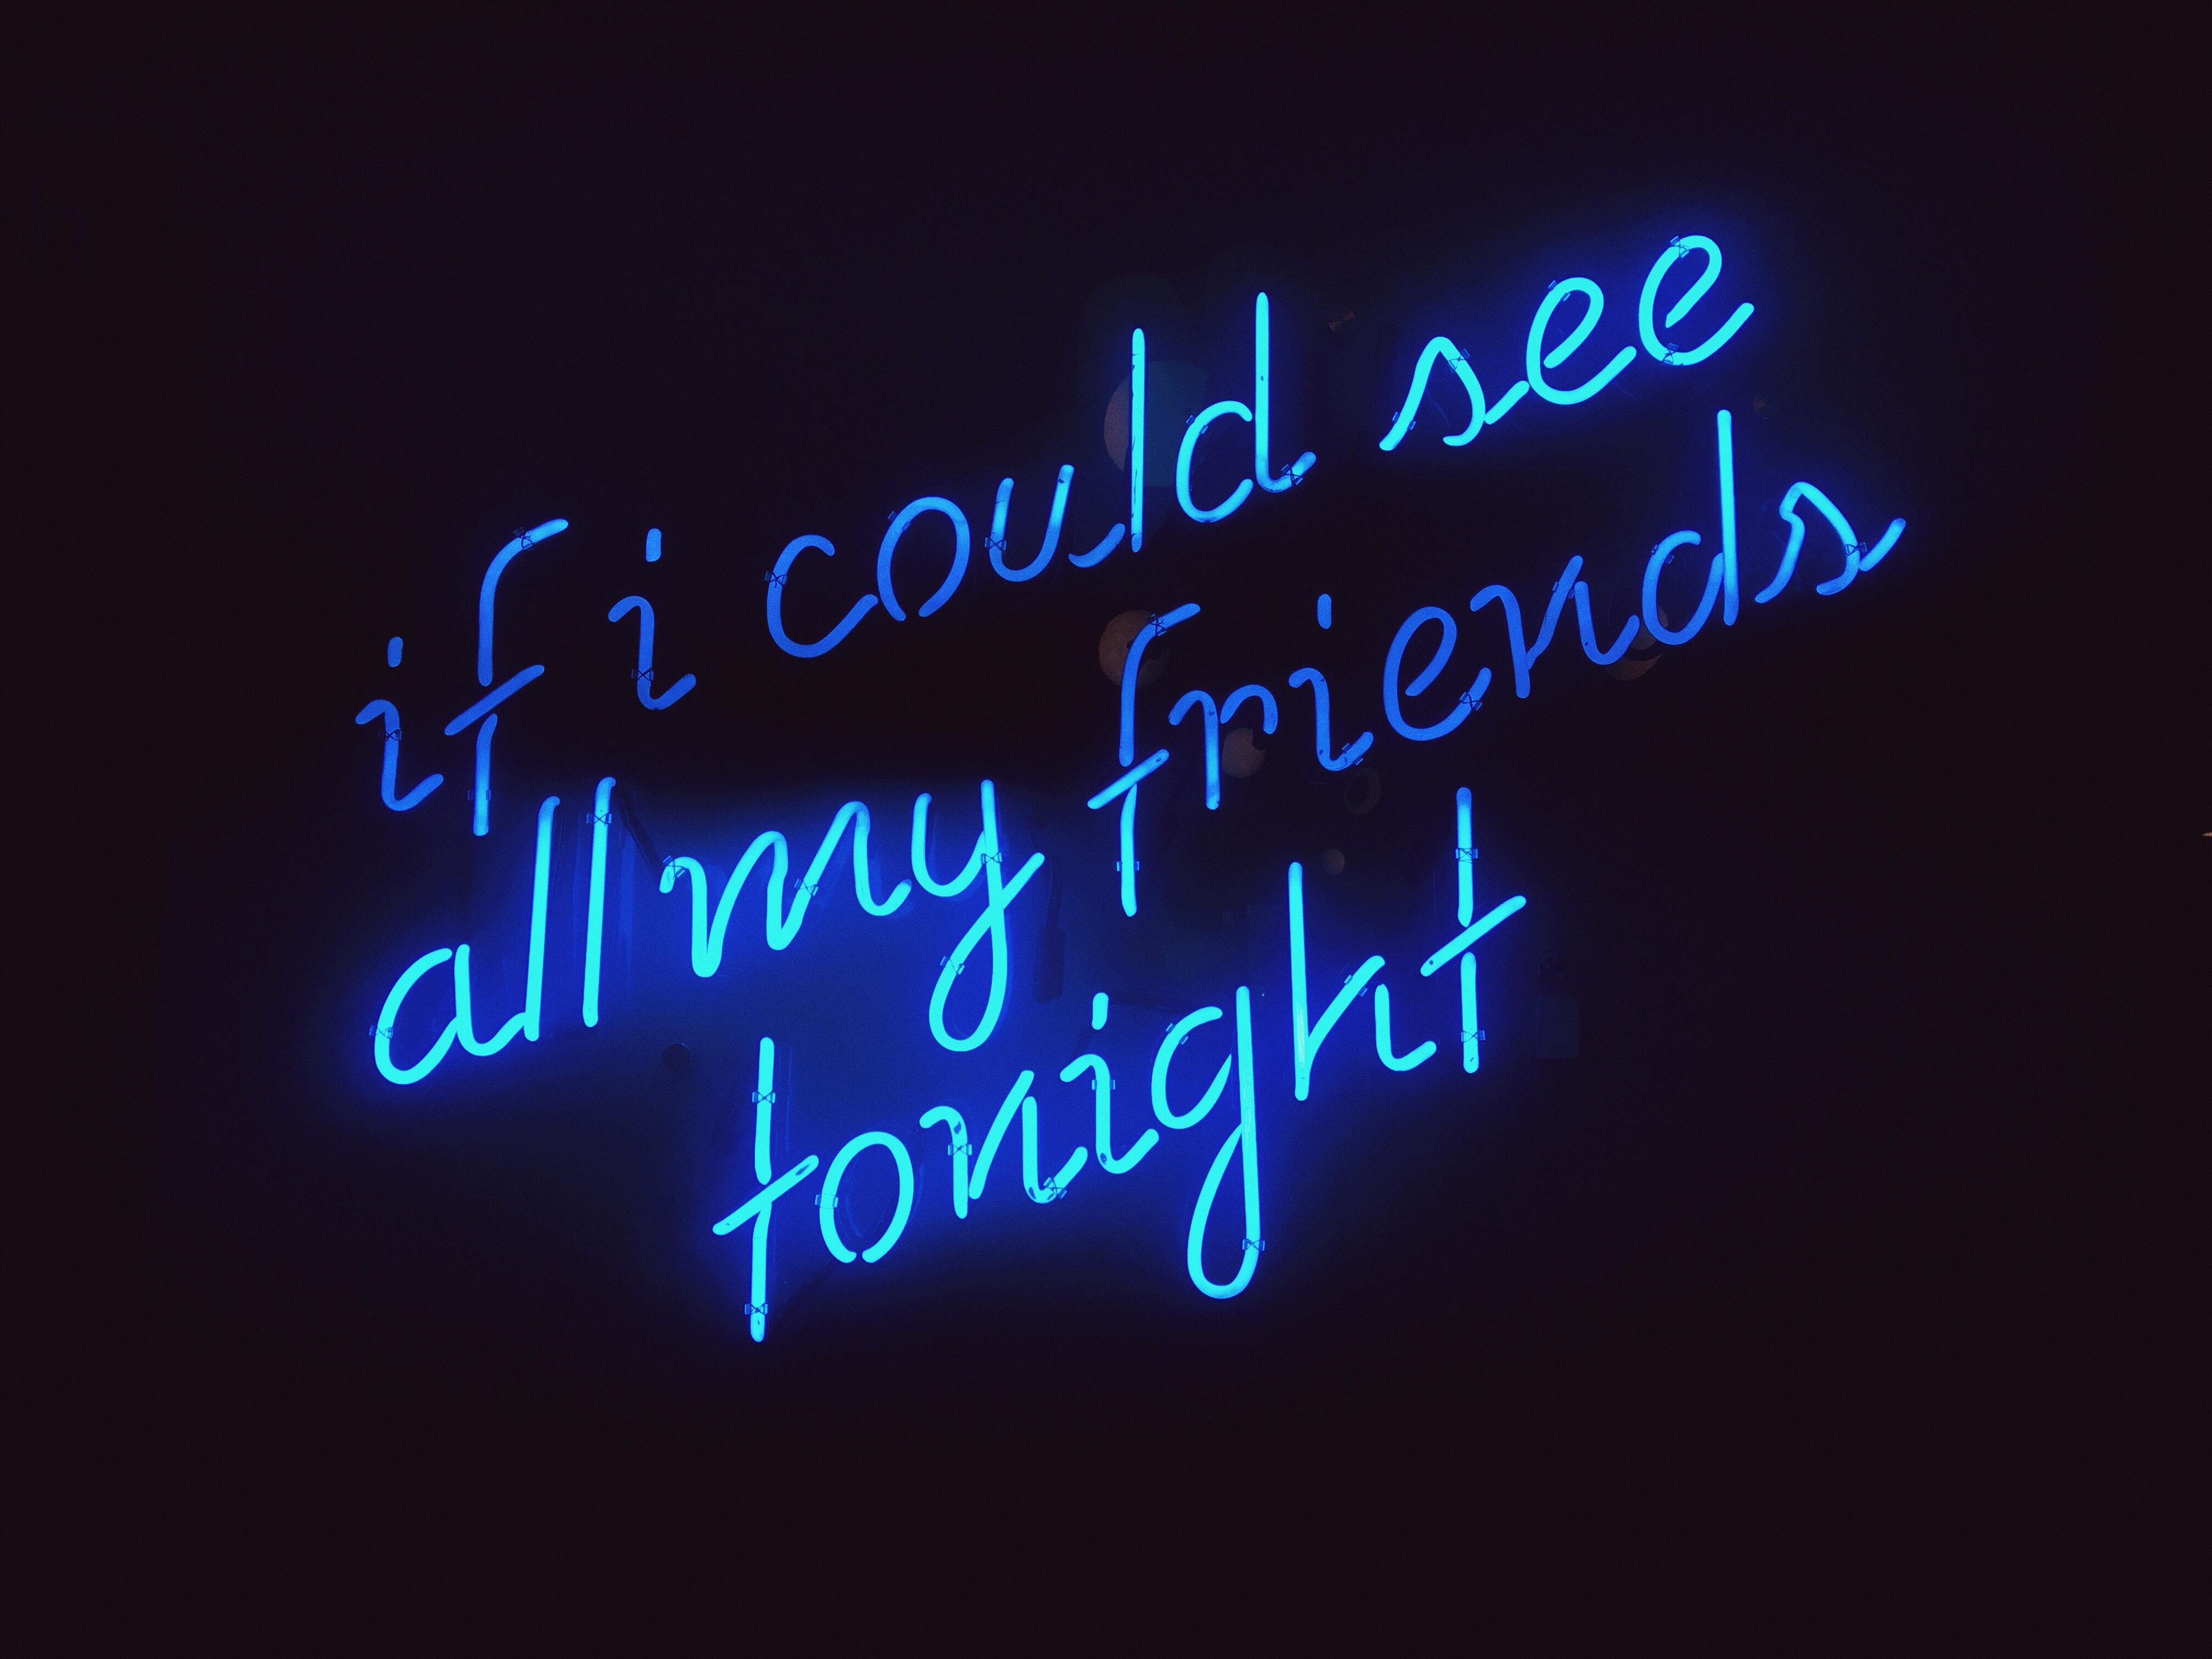 If I Could See All My Friends Tonight Lighted Led Sign, - If I Could See All My Friends Tonight - HD Wallpaper 